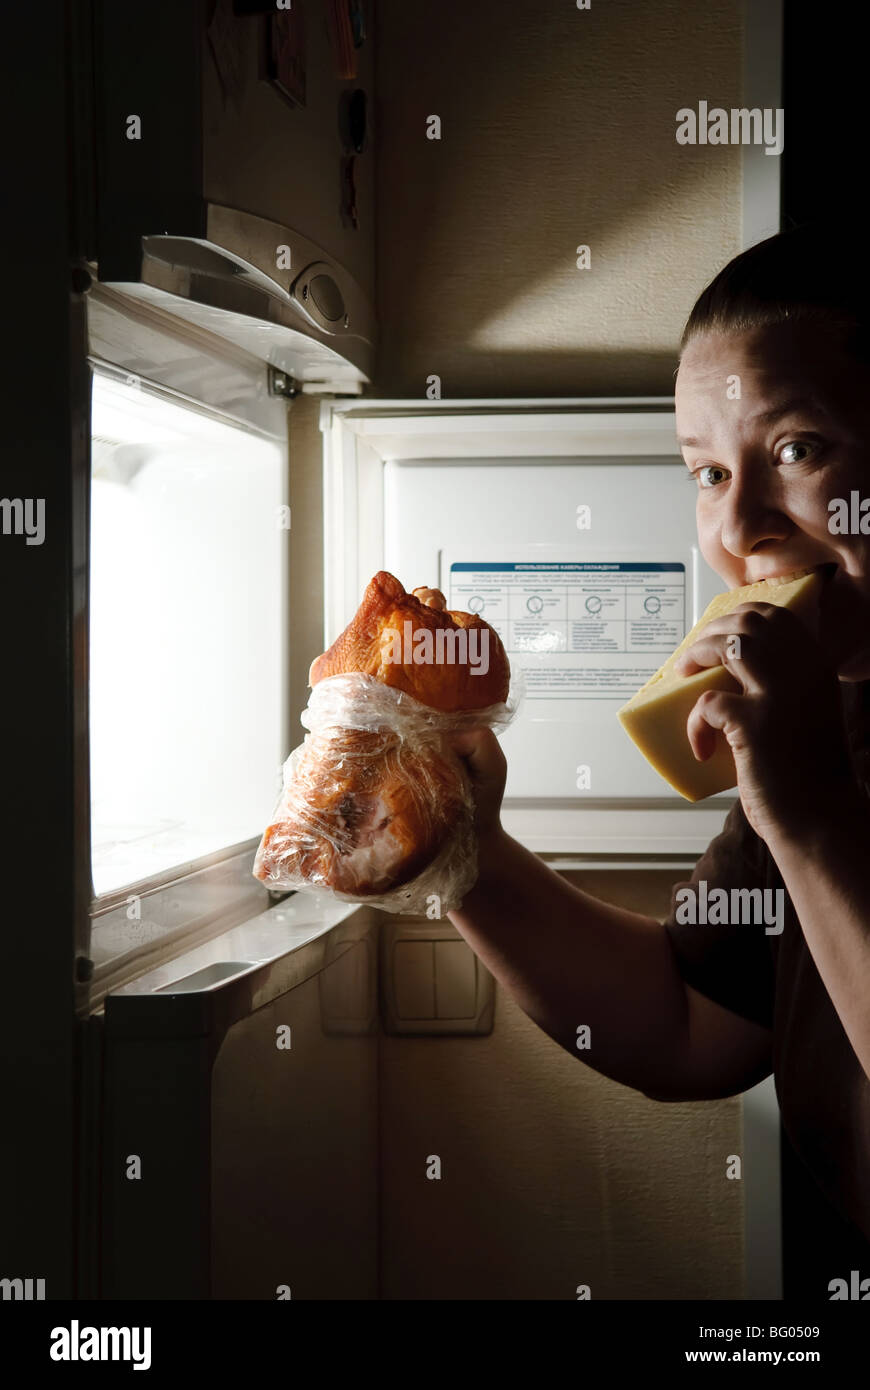 woman in front of the fridge eating cheese Stock Photo